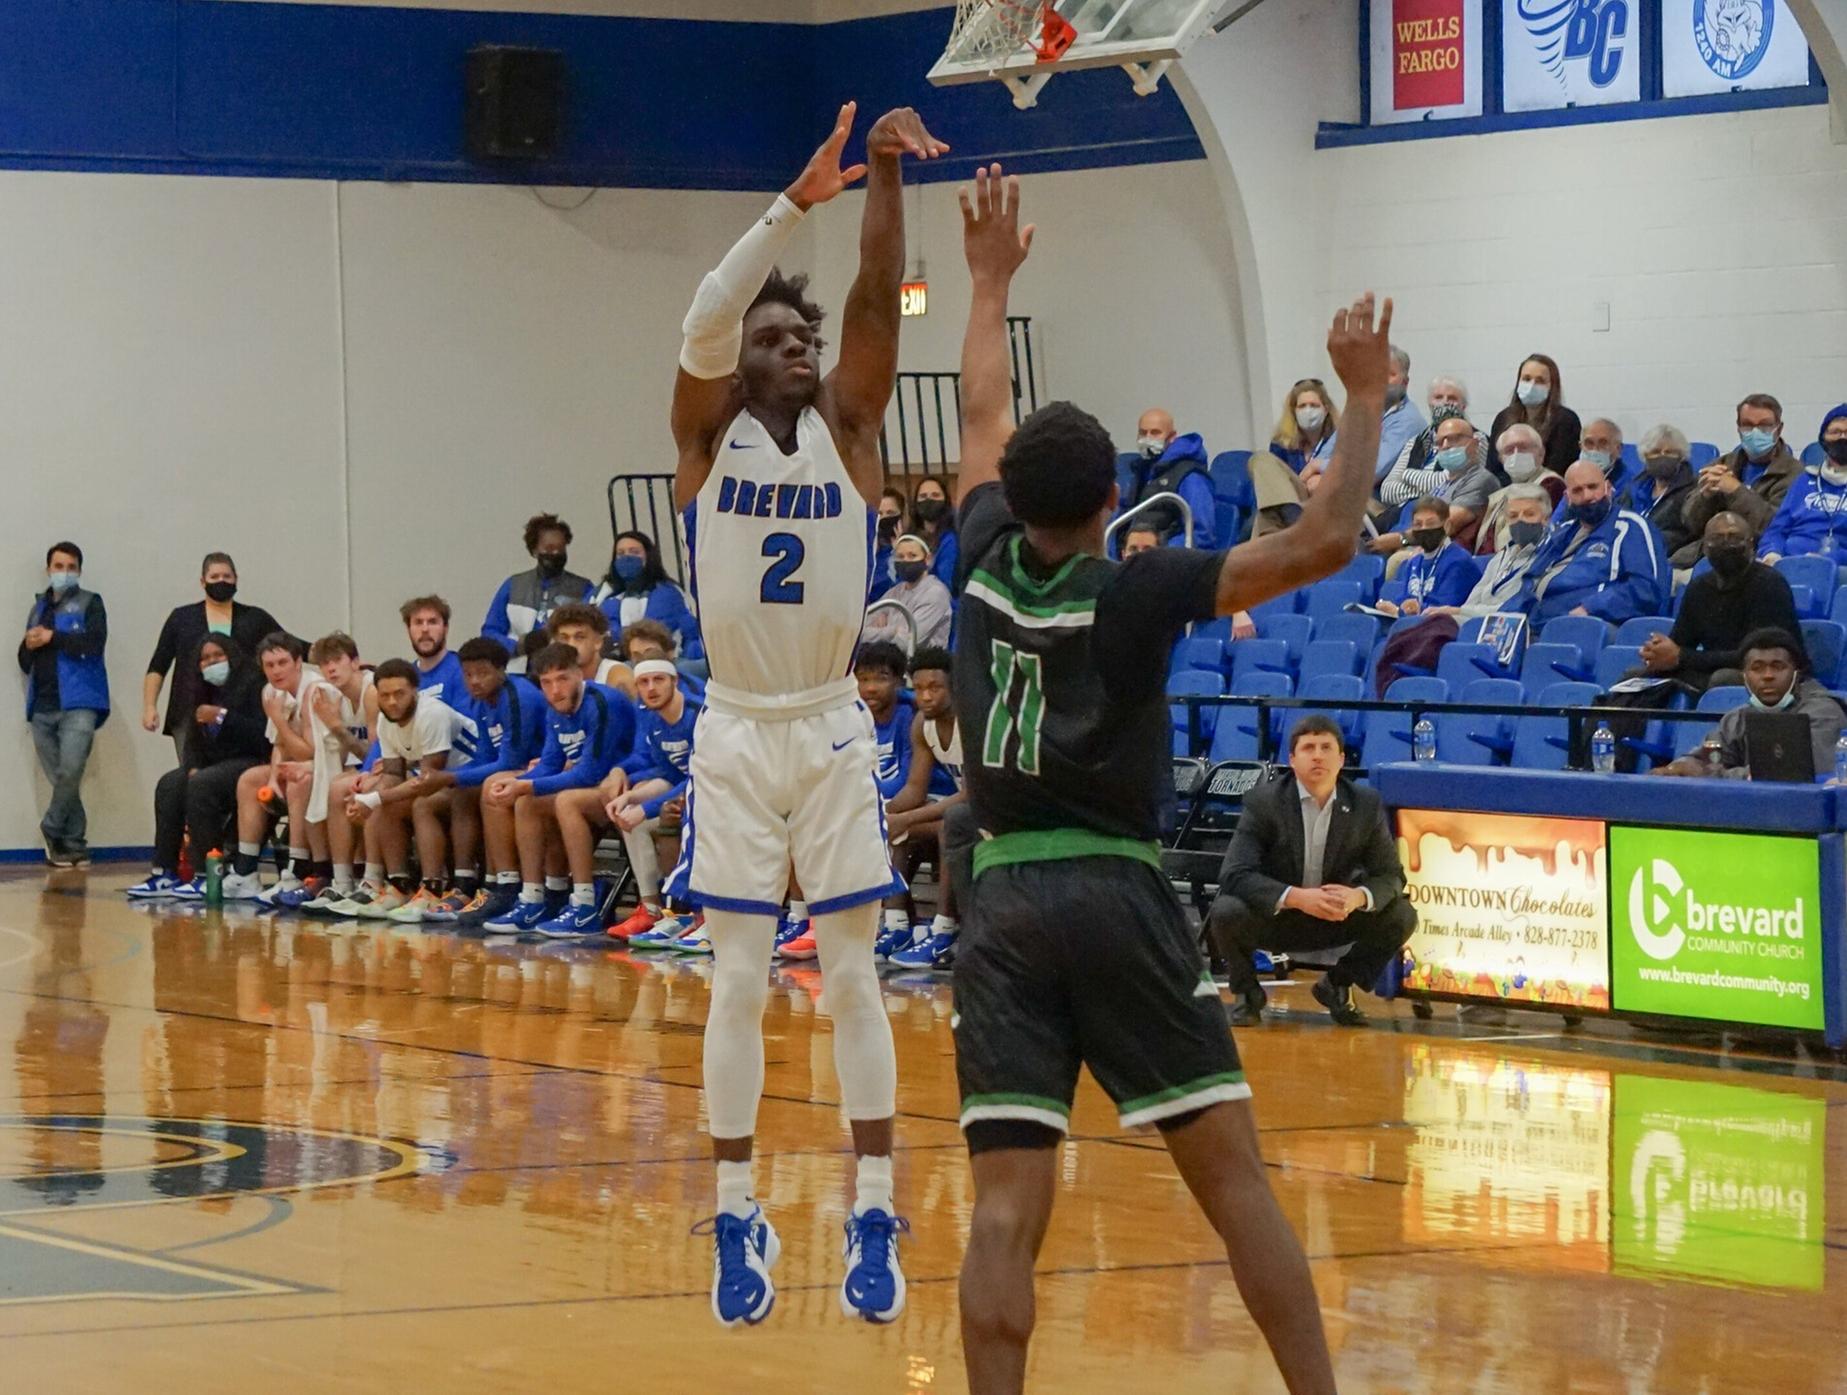 David Sealy posted 13 points on 4-of-5 shooting to help the Tornados to their third win in their last four games (Photo courtesy of Damon Hewitt '23).